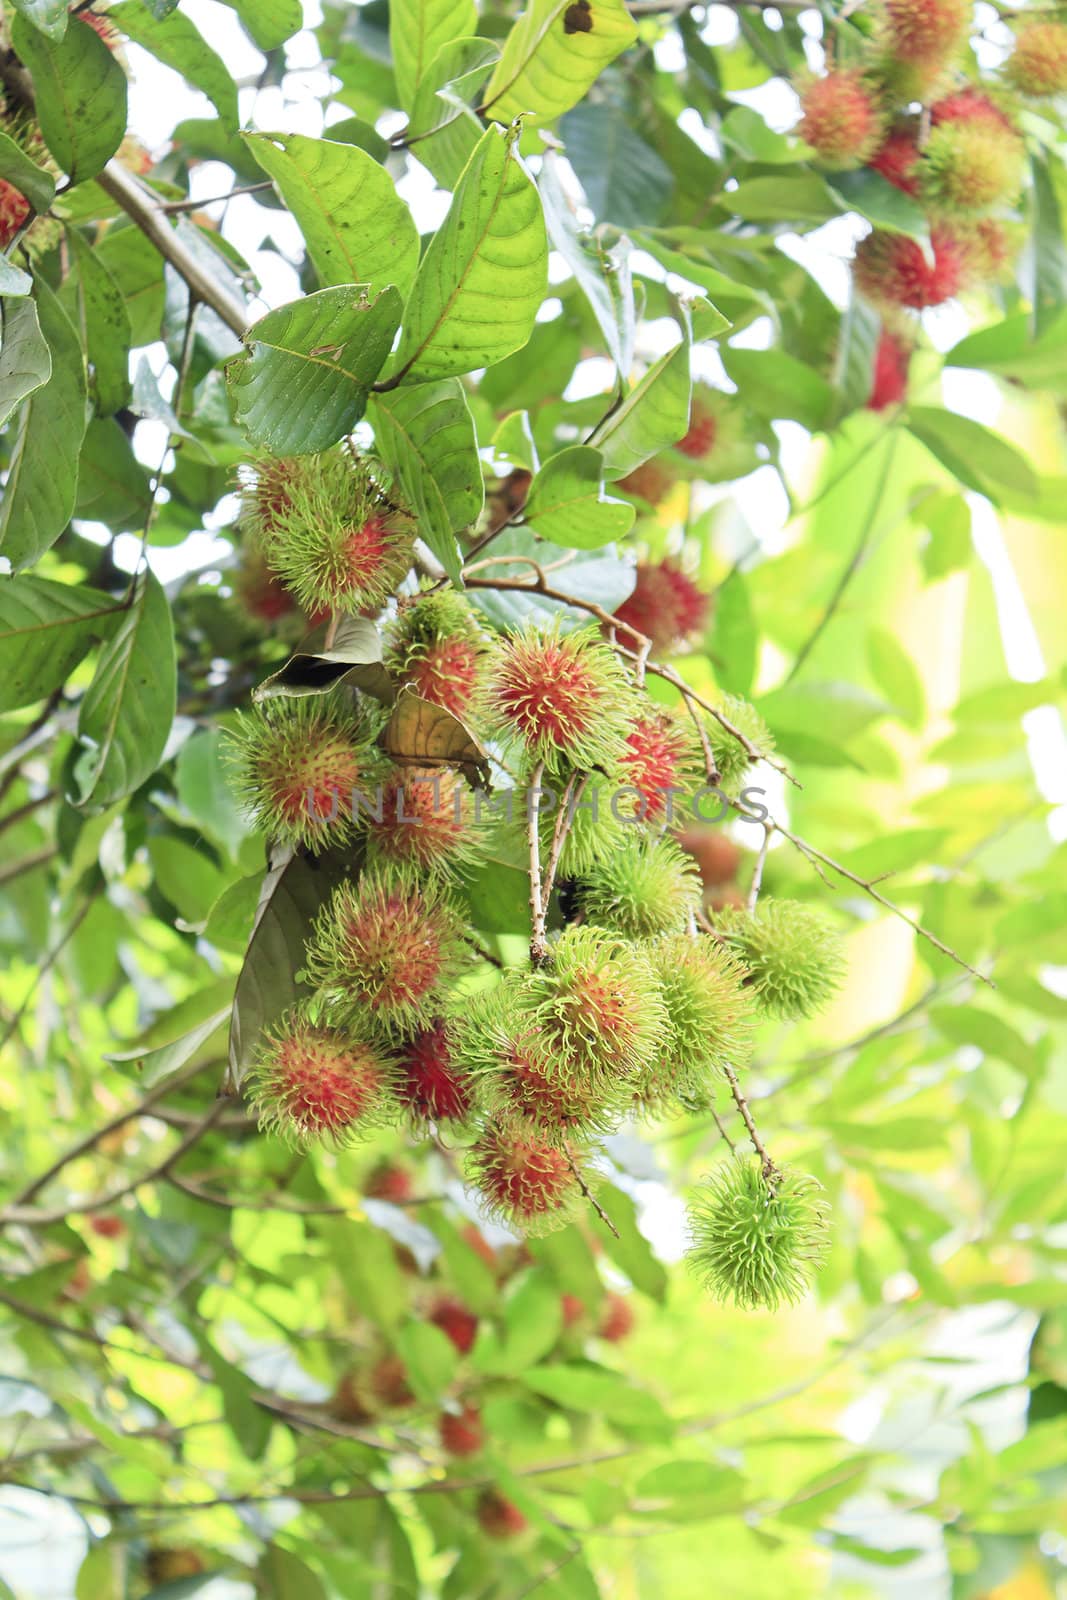 Ripening clutch of rambutans high up grow in its tree at Thailand